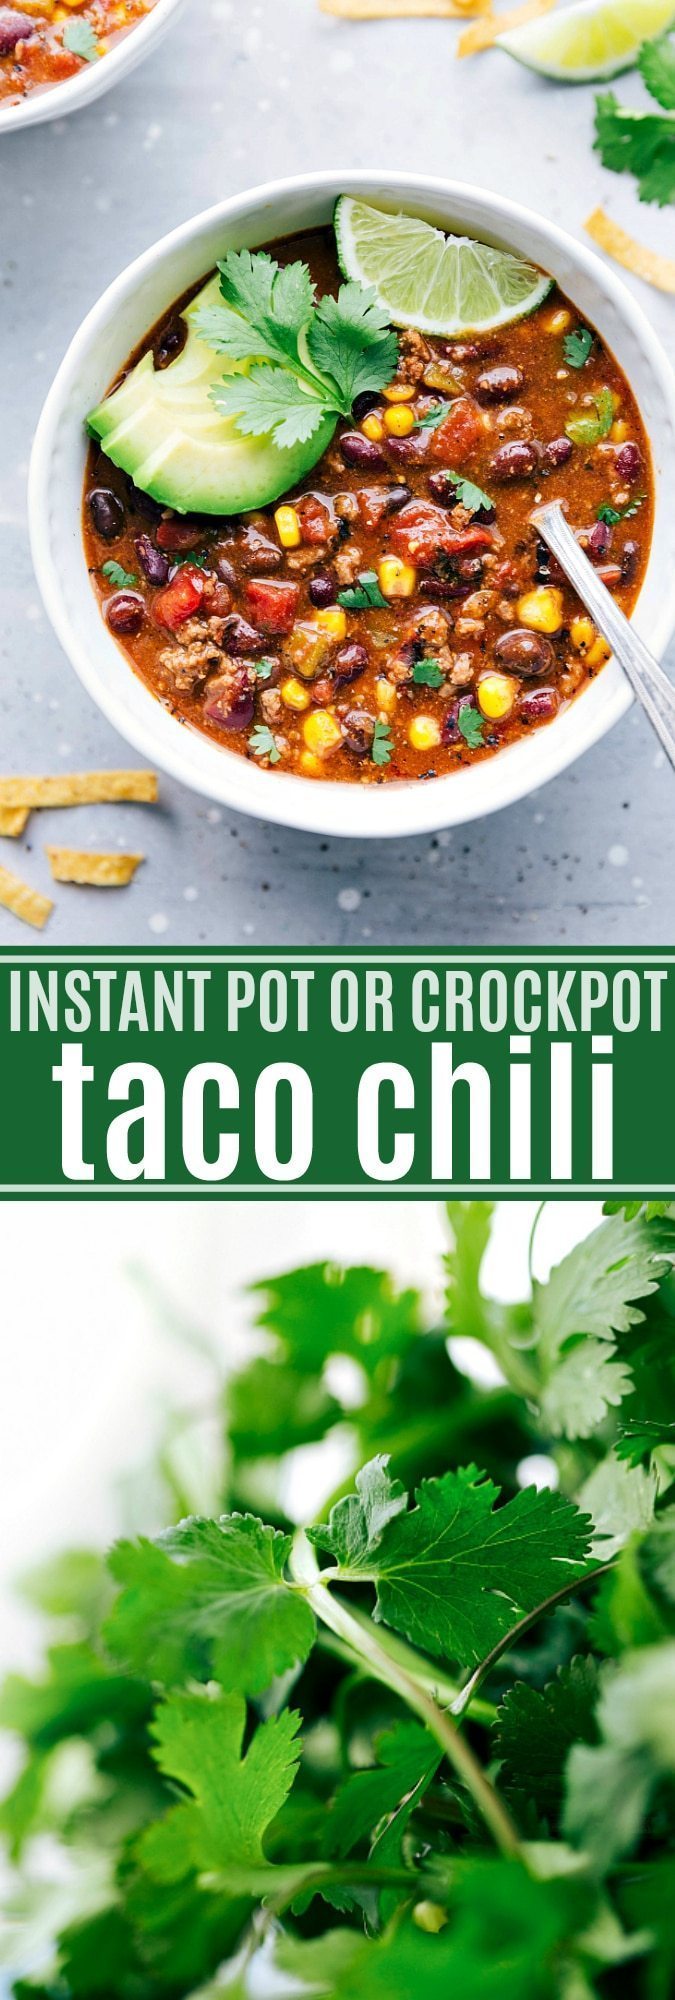 The best ever taco chili made in 30 minutes or less in the instant pot (pressure cooker)! Plus instructions for cooking this soup in a crockpot or on the stovetop. via chelseasmessyapron.com